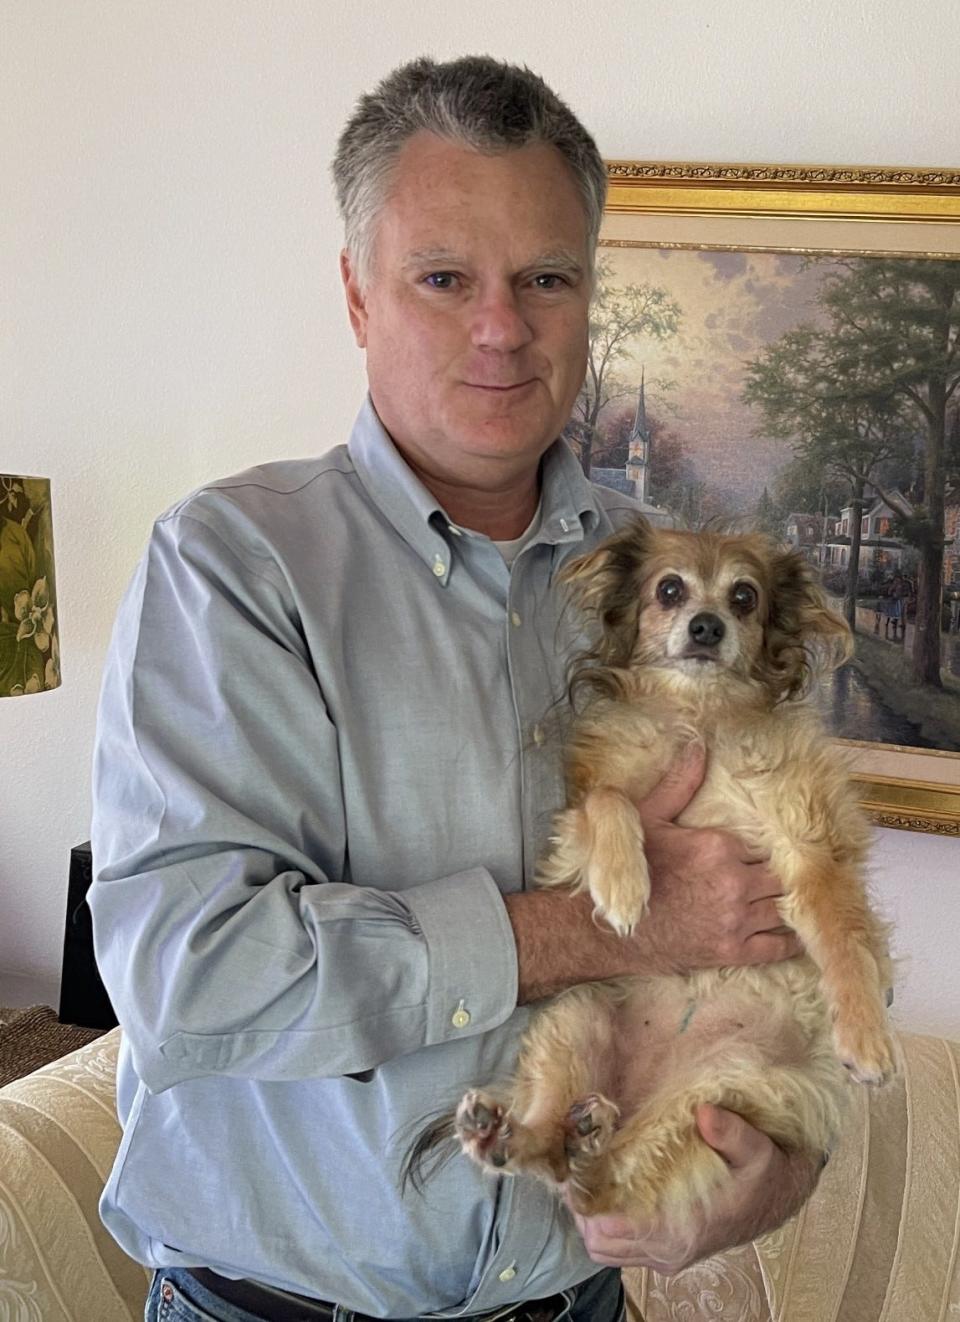 Robert Flaherty, 55, holds his deceased sister's pet dog, Holly. He and his sister Eileen Flaherty were struck by a vehicle April 2 on a sidewalk in Deltona. Eileen Flaherty perished.